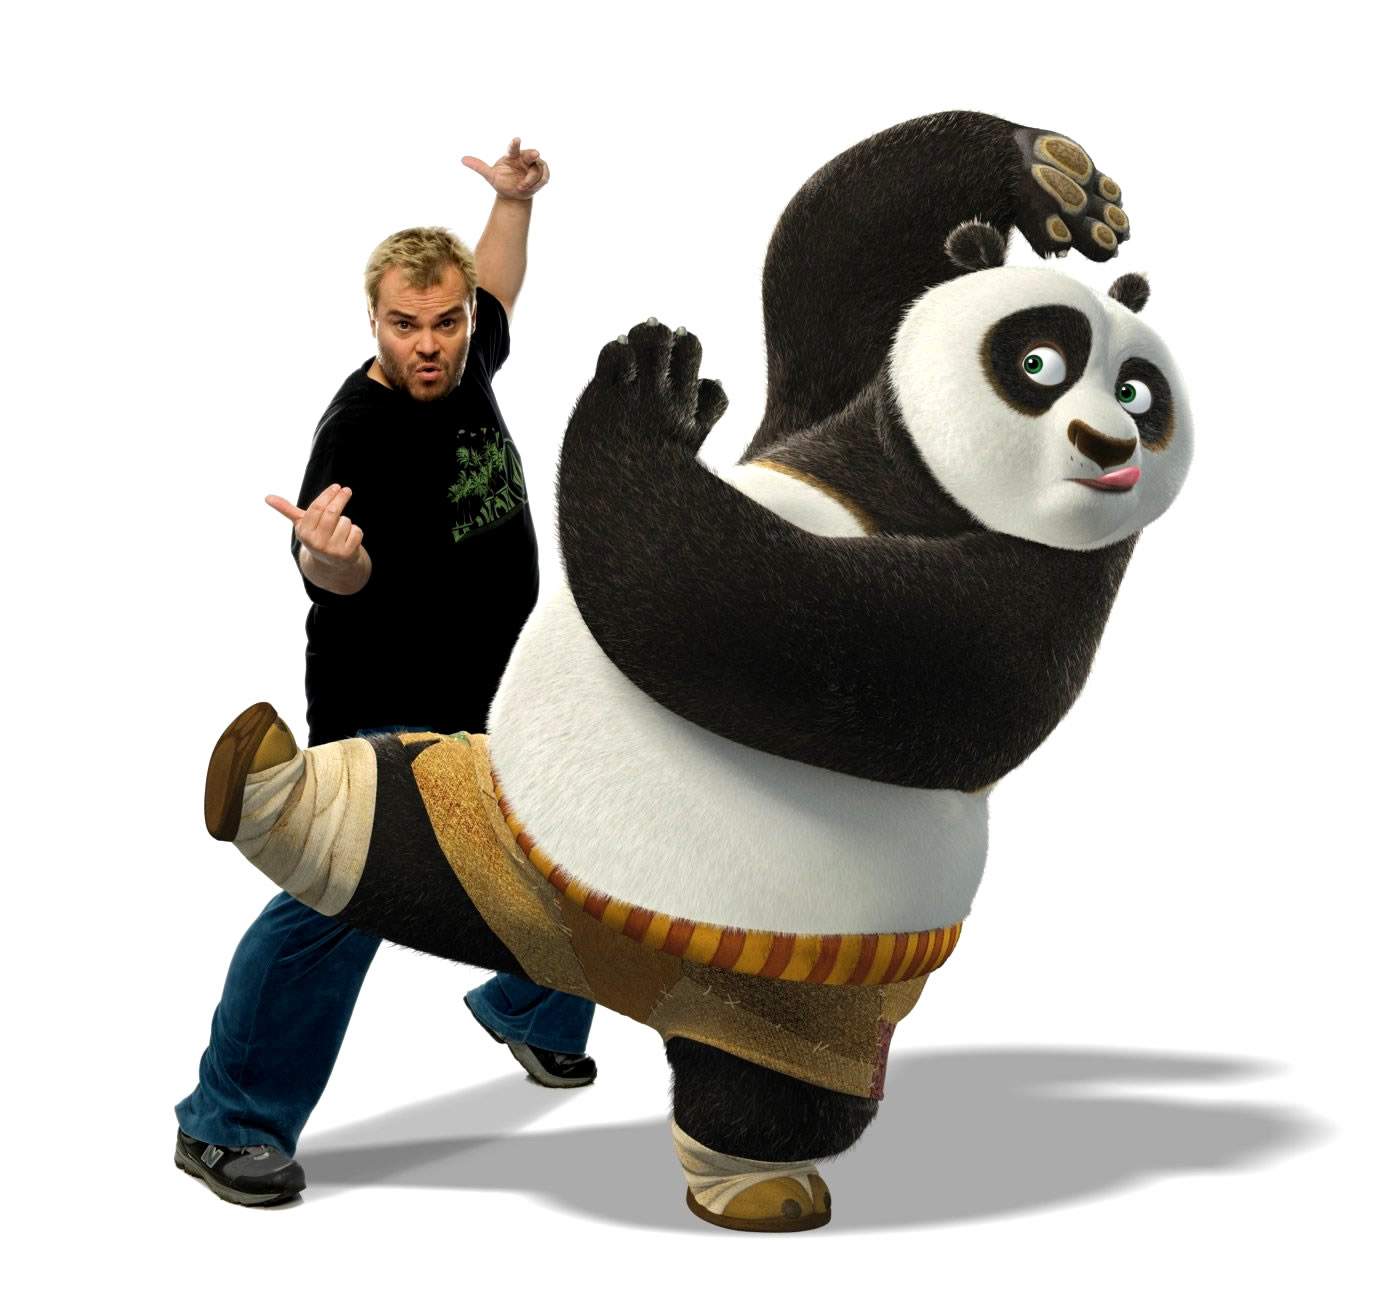 JACK BLACK voices Po, a clumsy panda unexpectedly chosen to fulfill an ancient prophecy and train in the art of kung fu, in DreamWorks' Kung Fu Panda (2008). Photo by Patrick Ecclesine.